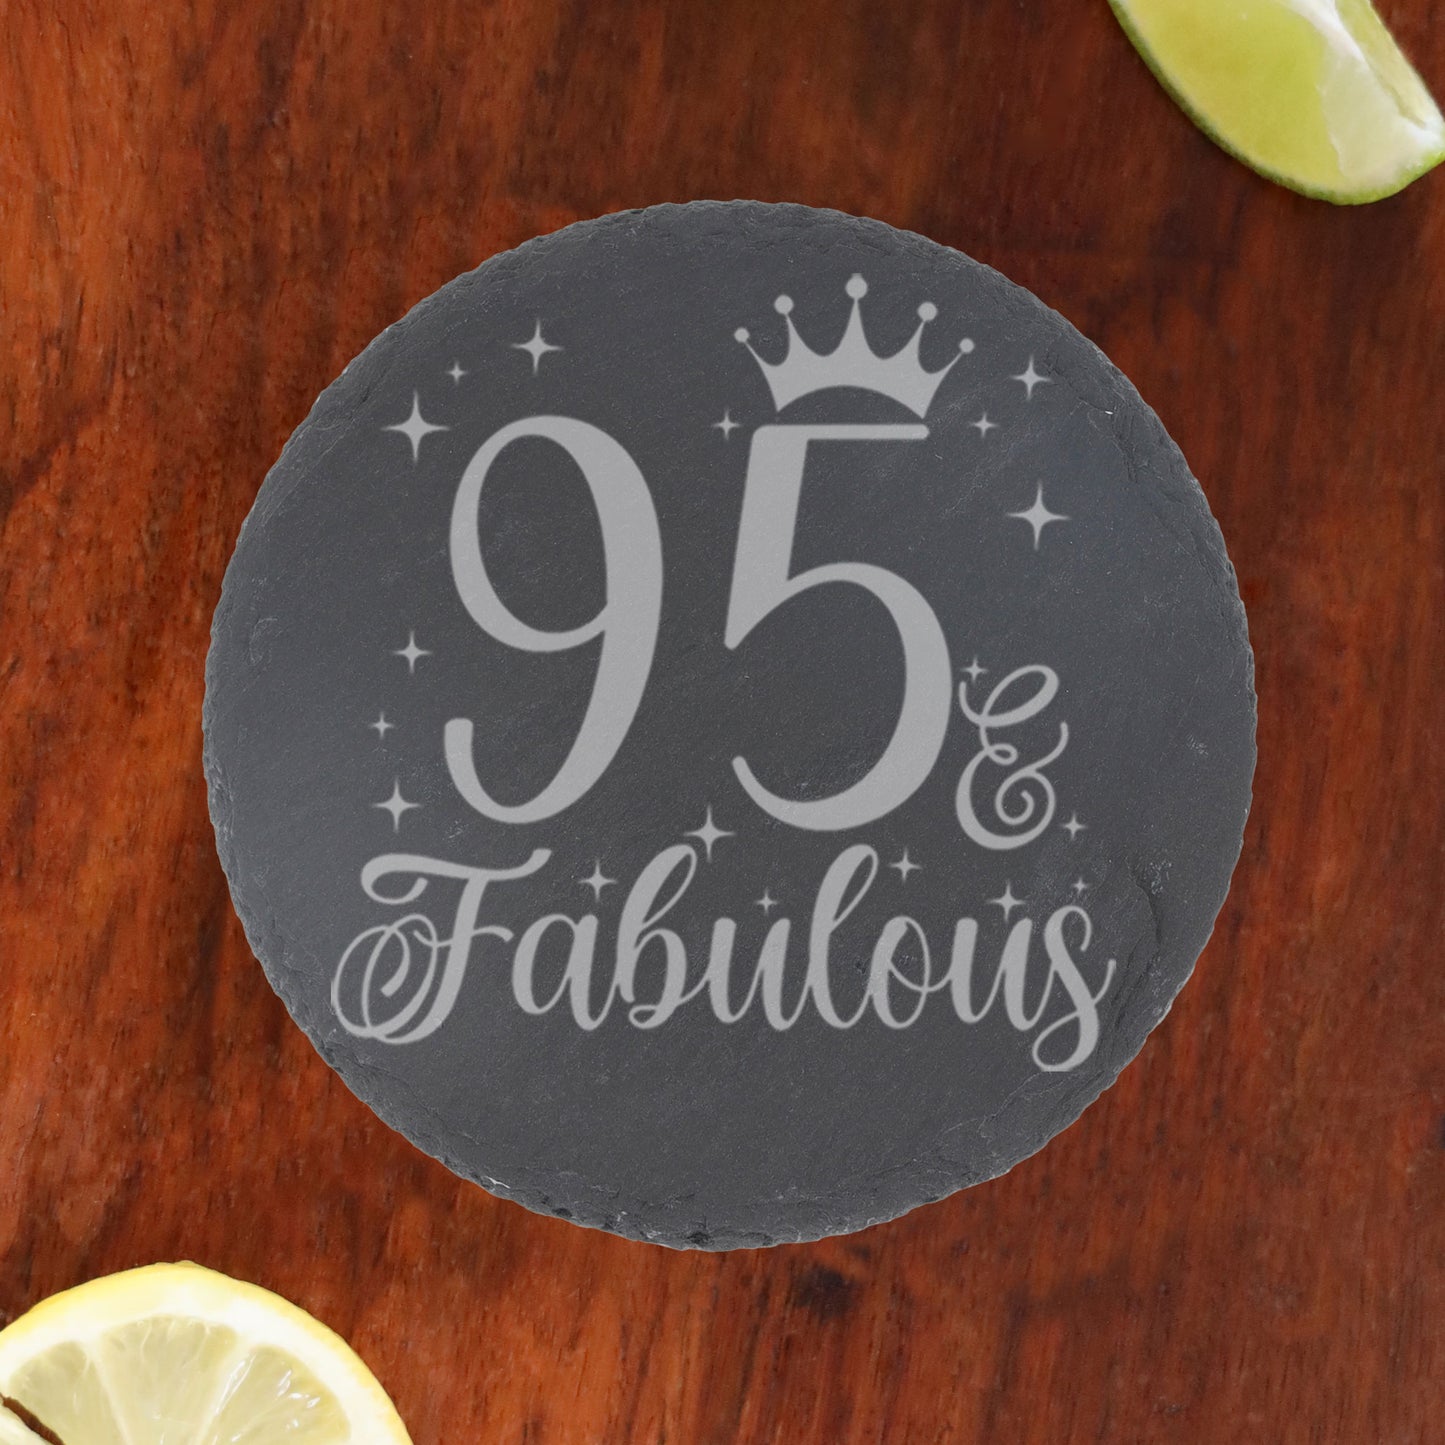 95 & Fabulous 95th Birthday Gift Engraved Wine Glass and/or Coaster Set  - Always Looking Good - Round Coaster Only  